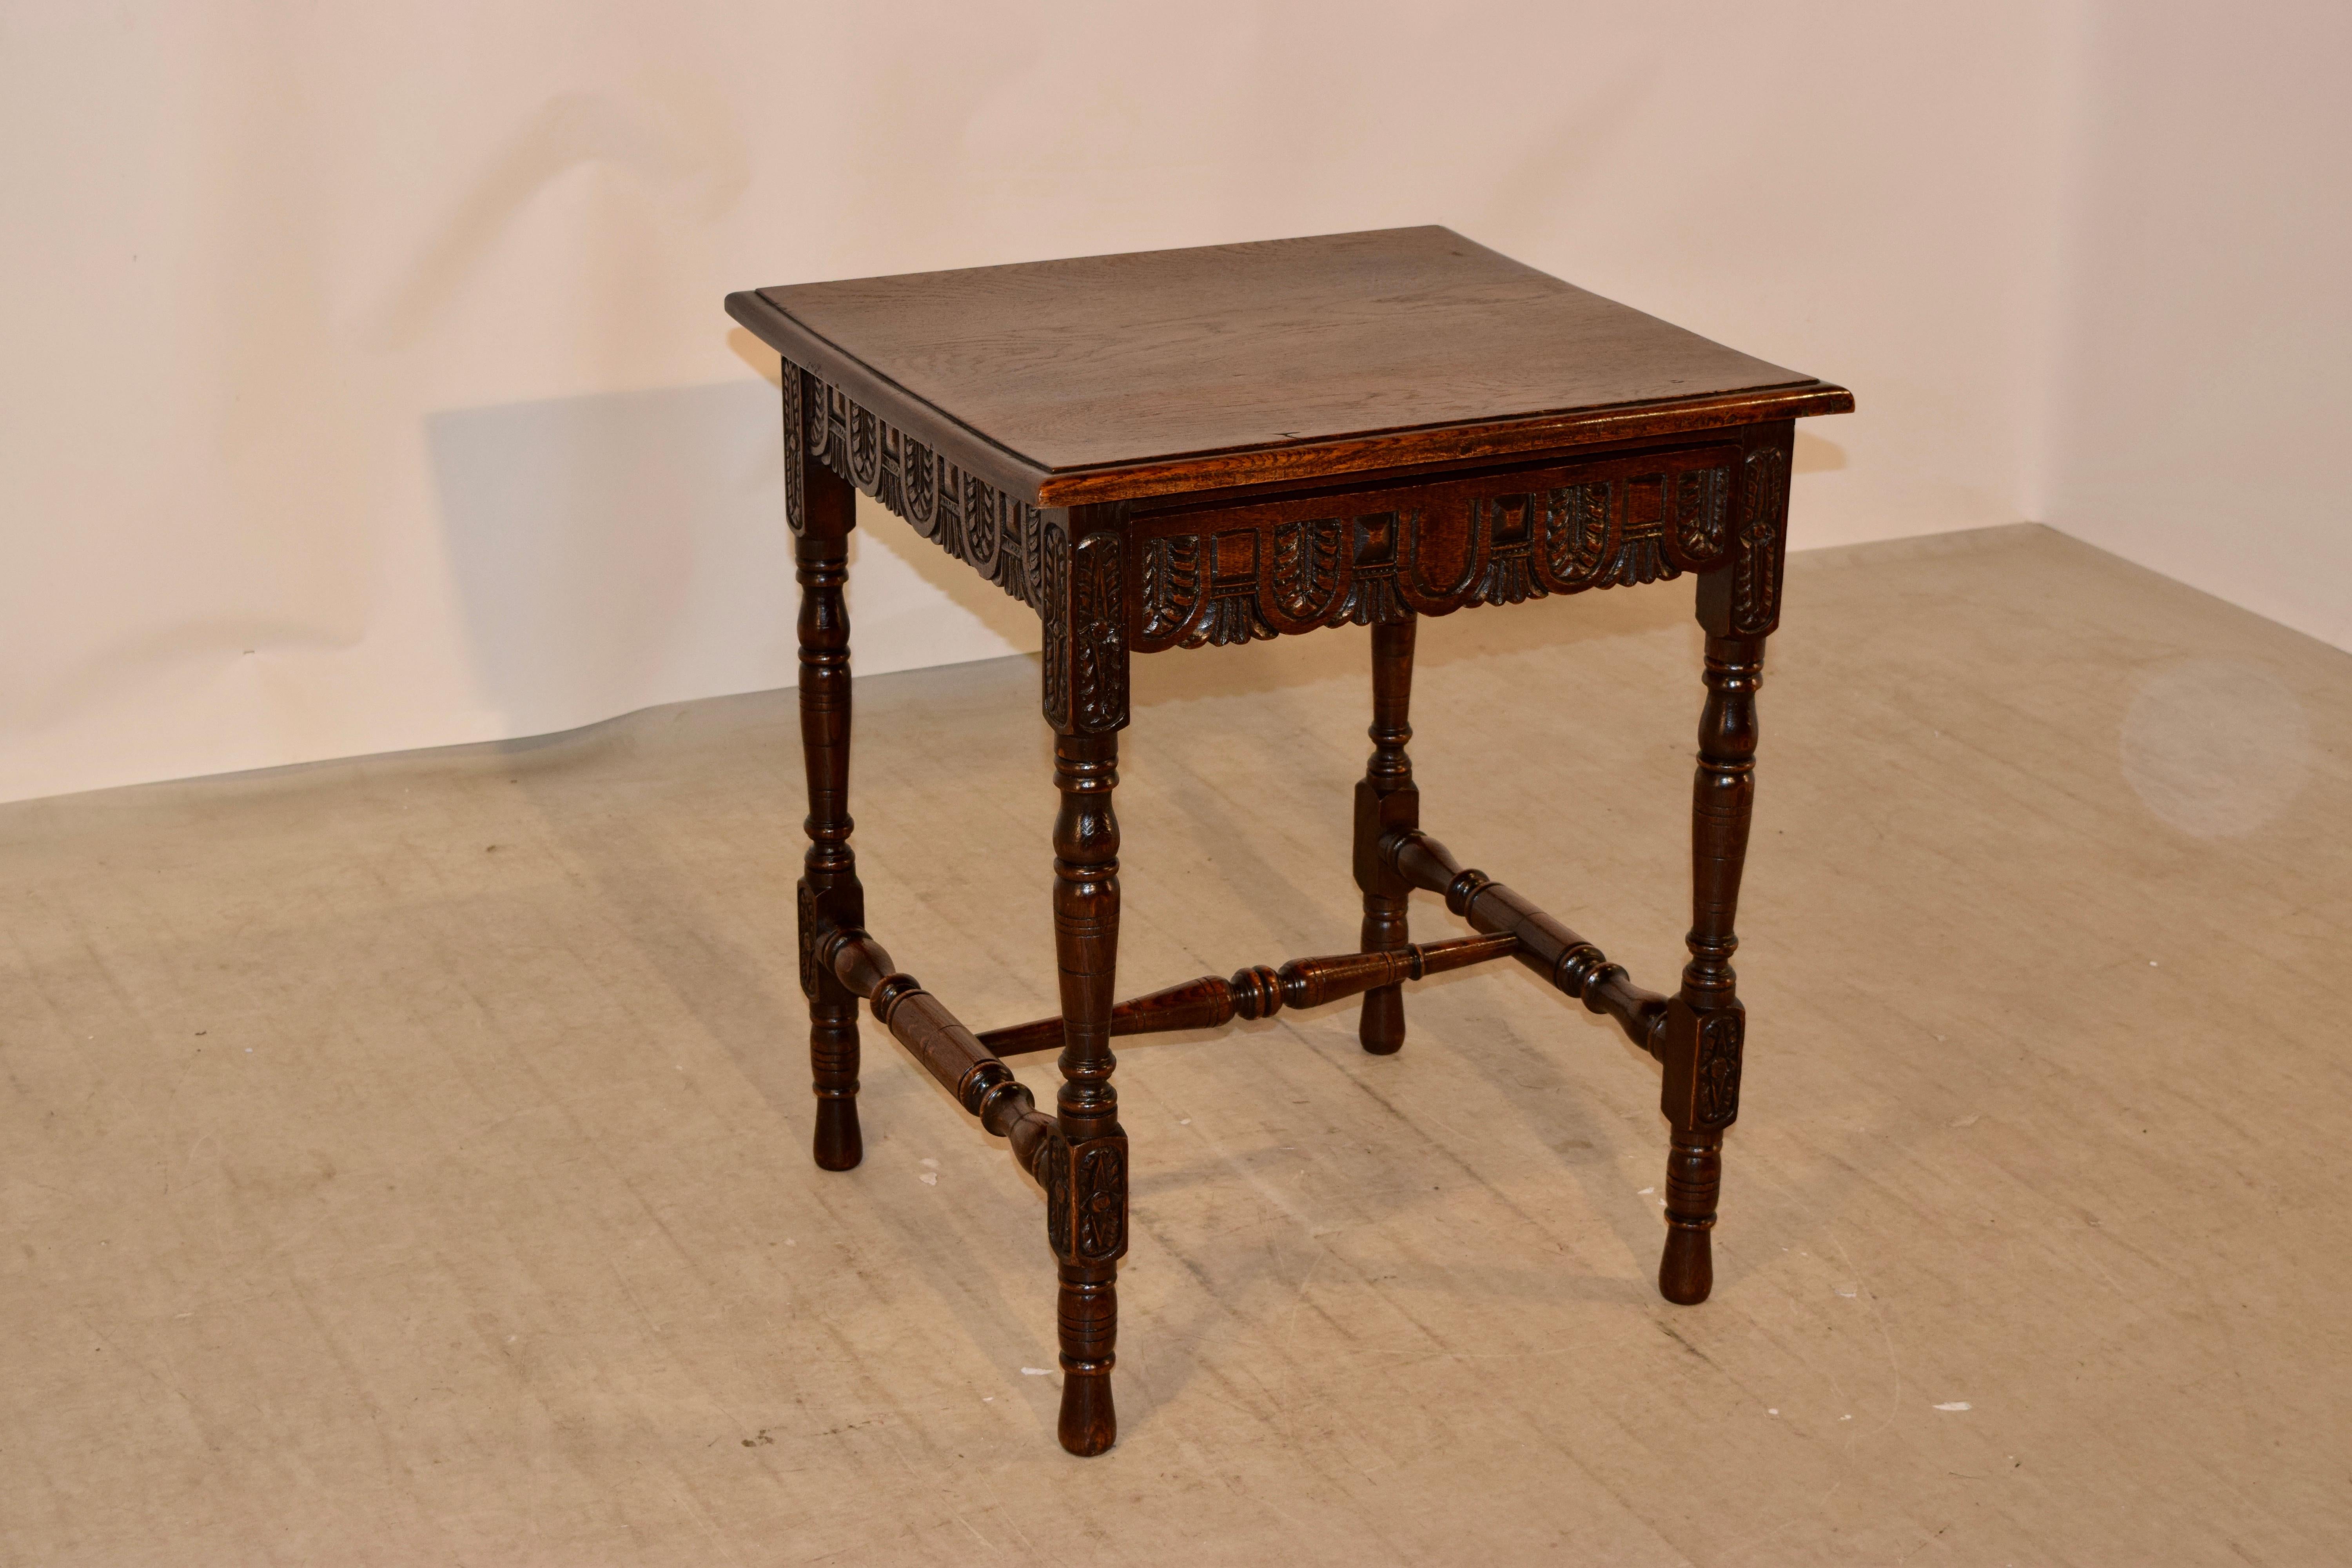 19th century English oak side table with a beveled edge around the top, following down to a hand carved decorated apron which contains a single drawer in the front. The table is supported on hand turned legs, joined by matching stretchers. Raised on